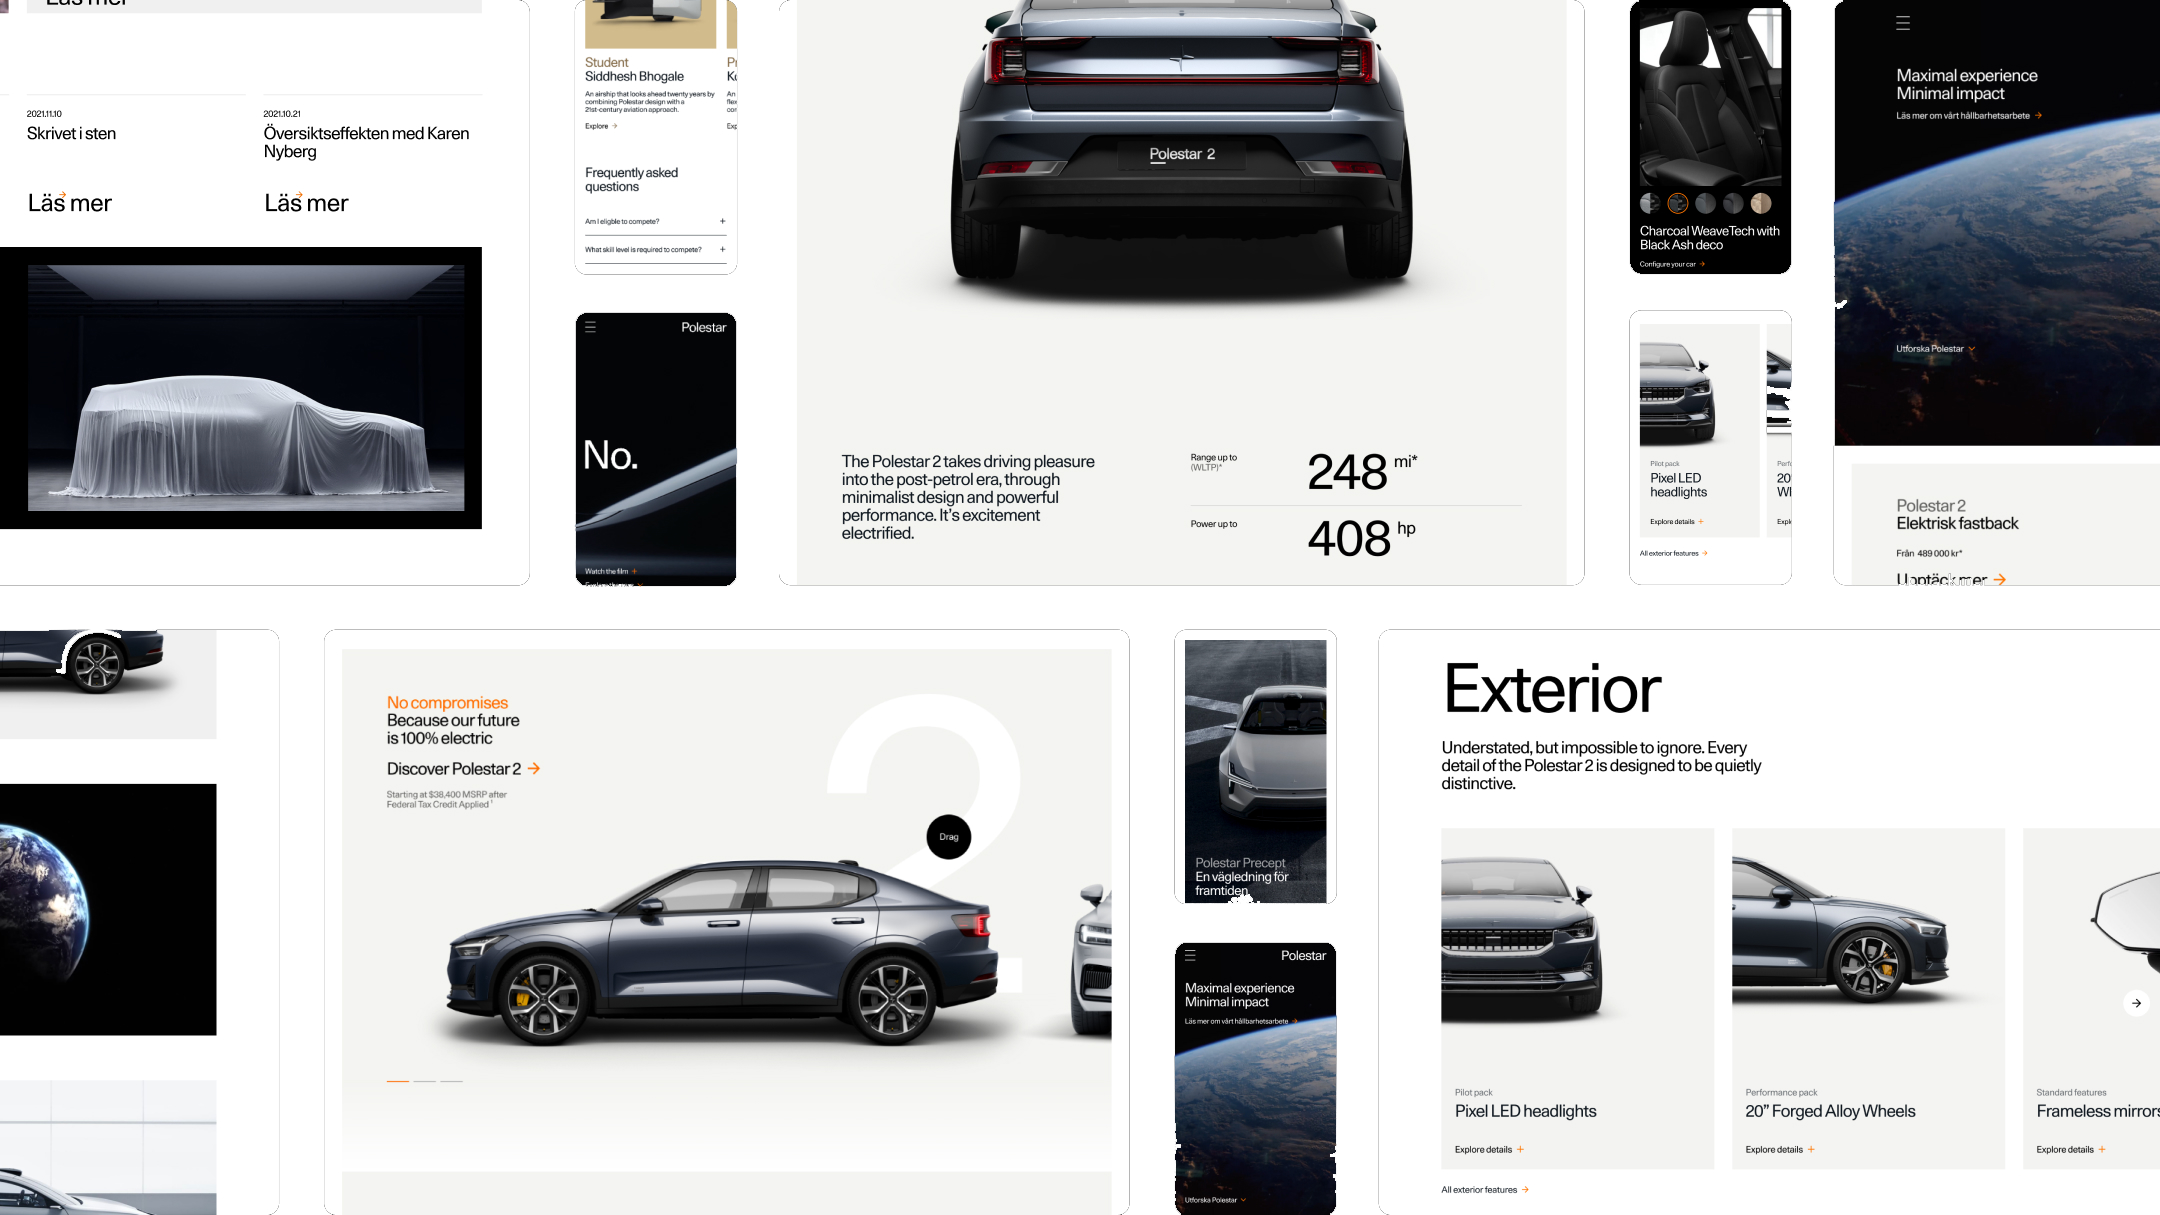 Grid with various screens from the Polestar 2 pages, such as; a Polestar 2 covered with a white sheet, shot of the back of the Polestar 2 with USPs regarding range and power, detail shots of the interiour materials, detail shot of thye headlights, images of the earth viewed from space, sideshot and exterior detail shots of the Polestar 2.